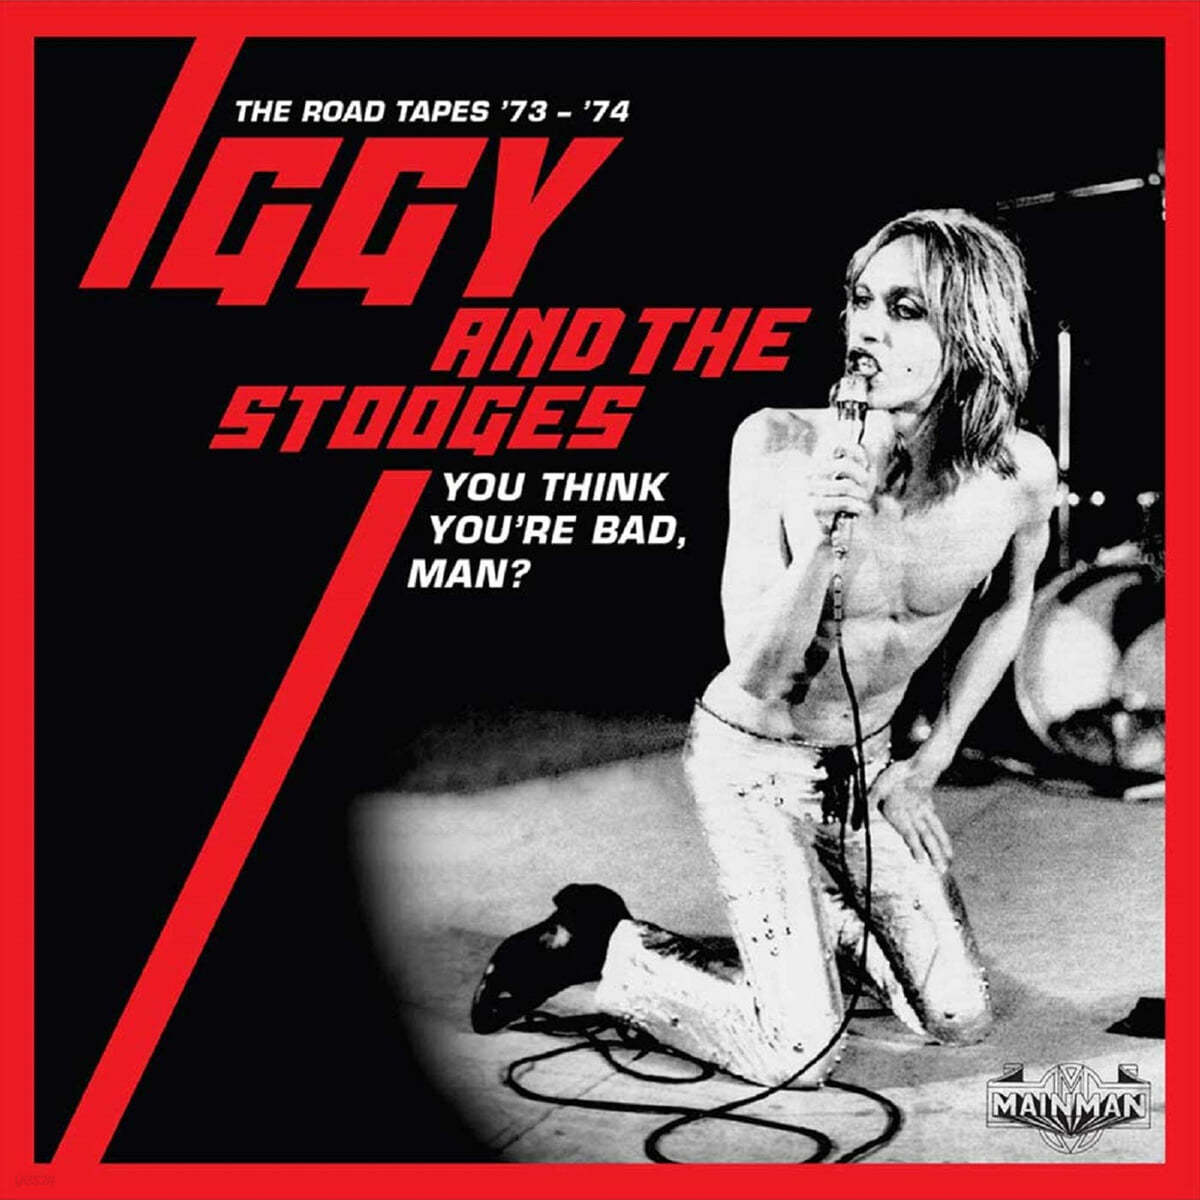 Iggy And The Stooges (이기 앤 더 스투지스) - You Think You’re Bad, Man? (The Road Tapes ‘73 - ‘74) 